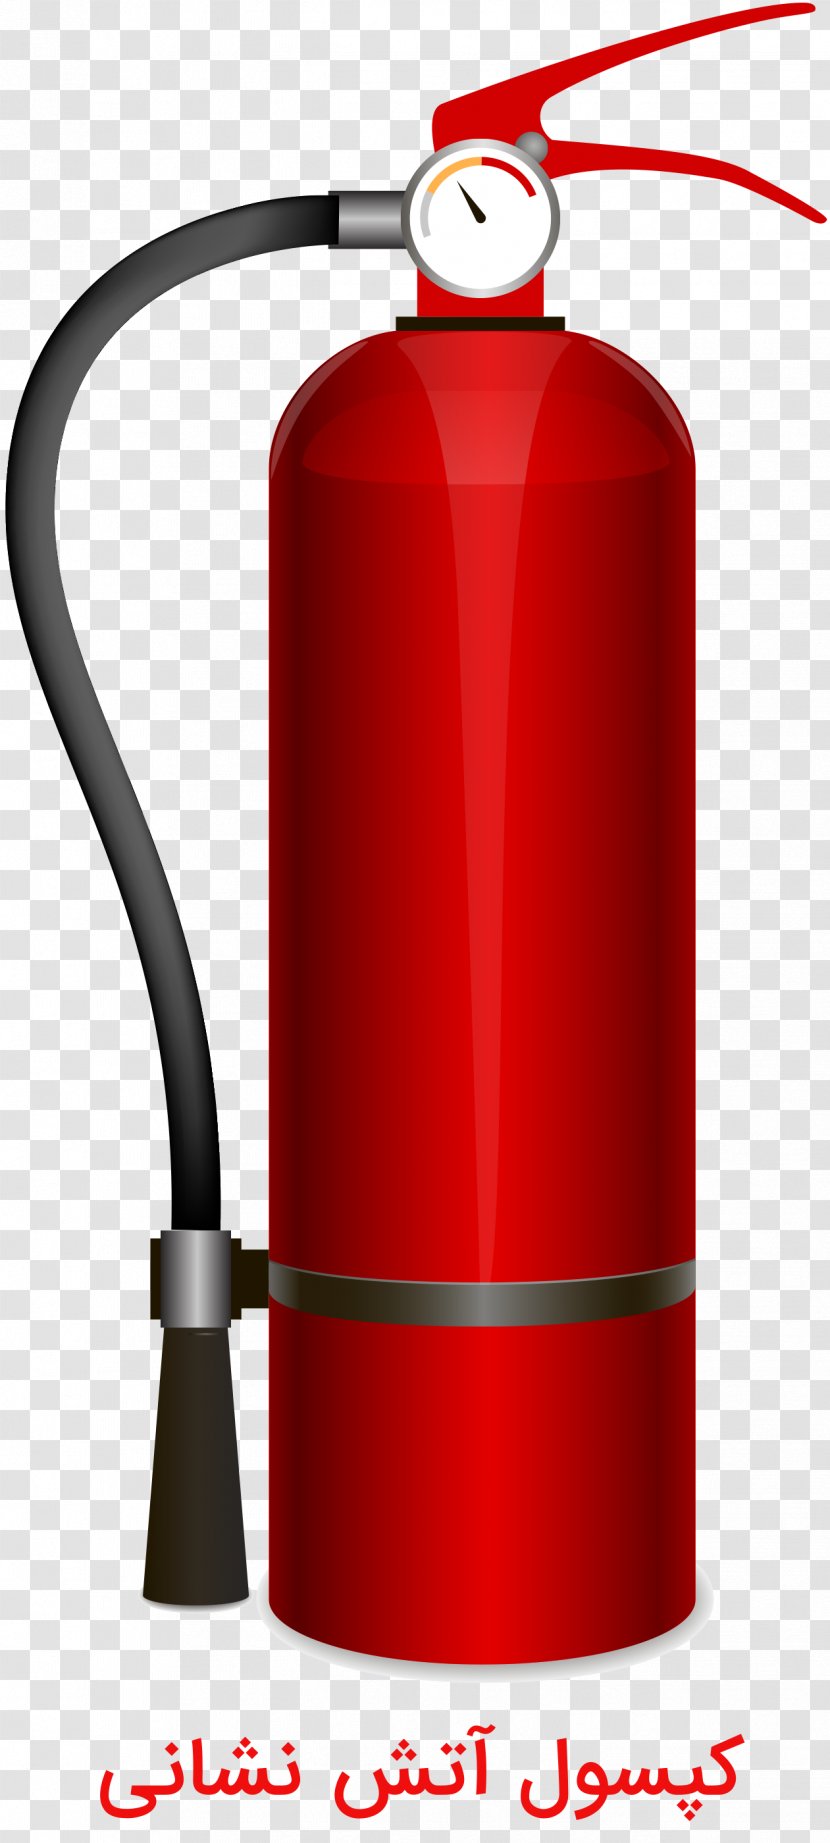 Fire Extinguishers Active Protection Conflagration - Firefighting Transparent PNG